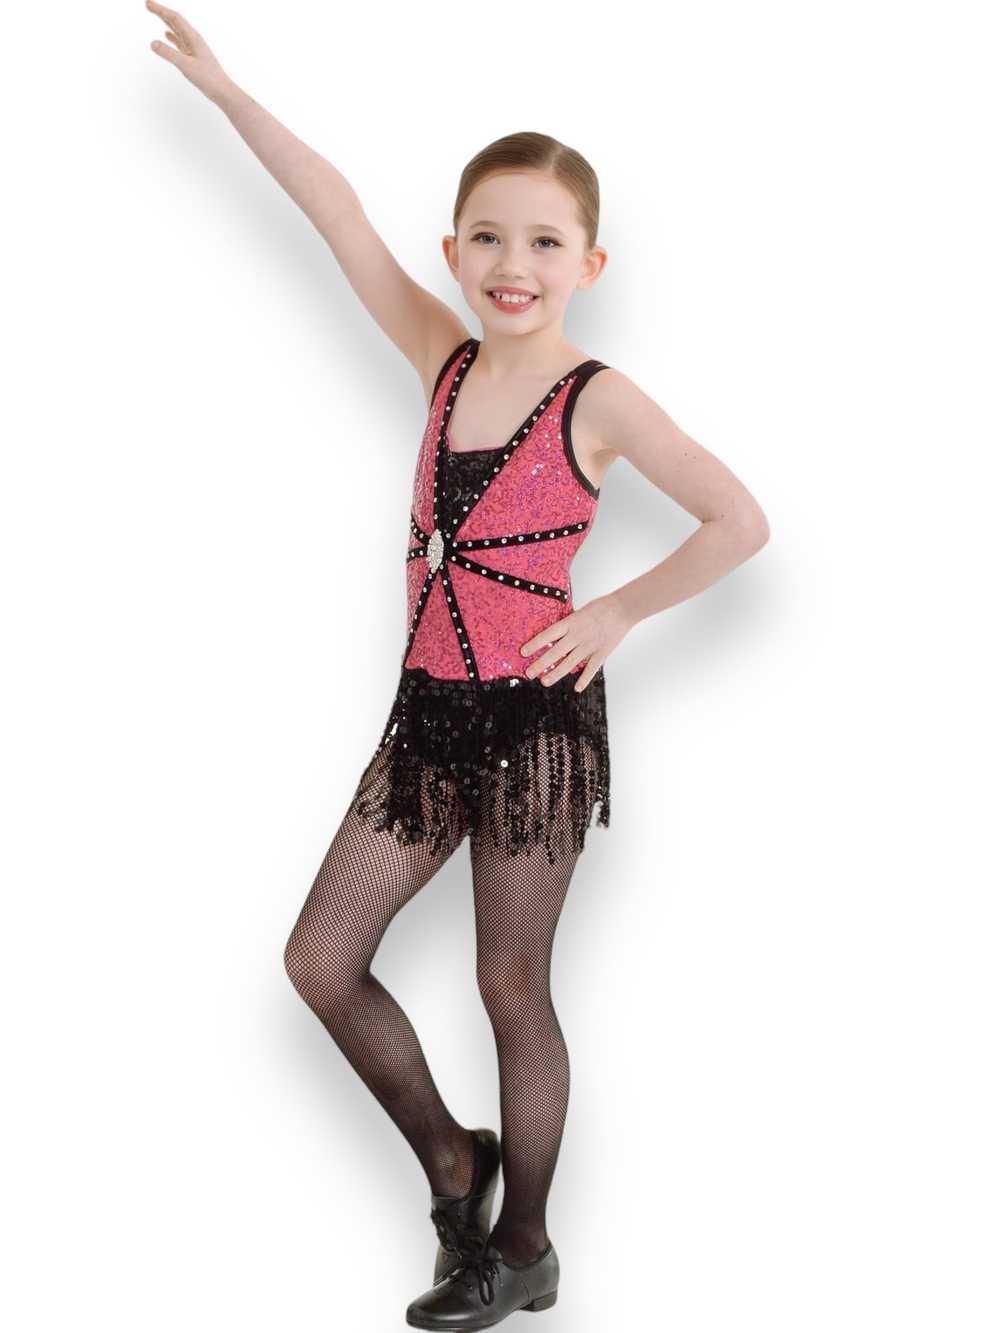 Dance costume - SPICE UP YOUR LIFE - image 1